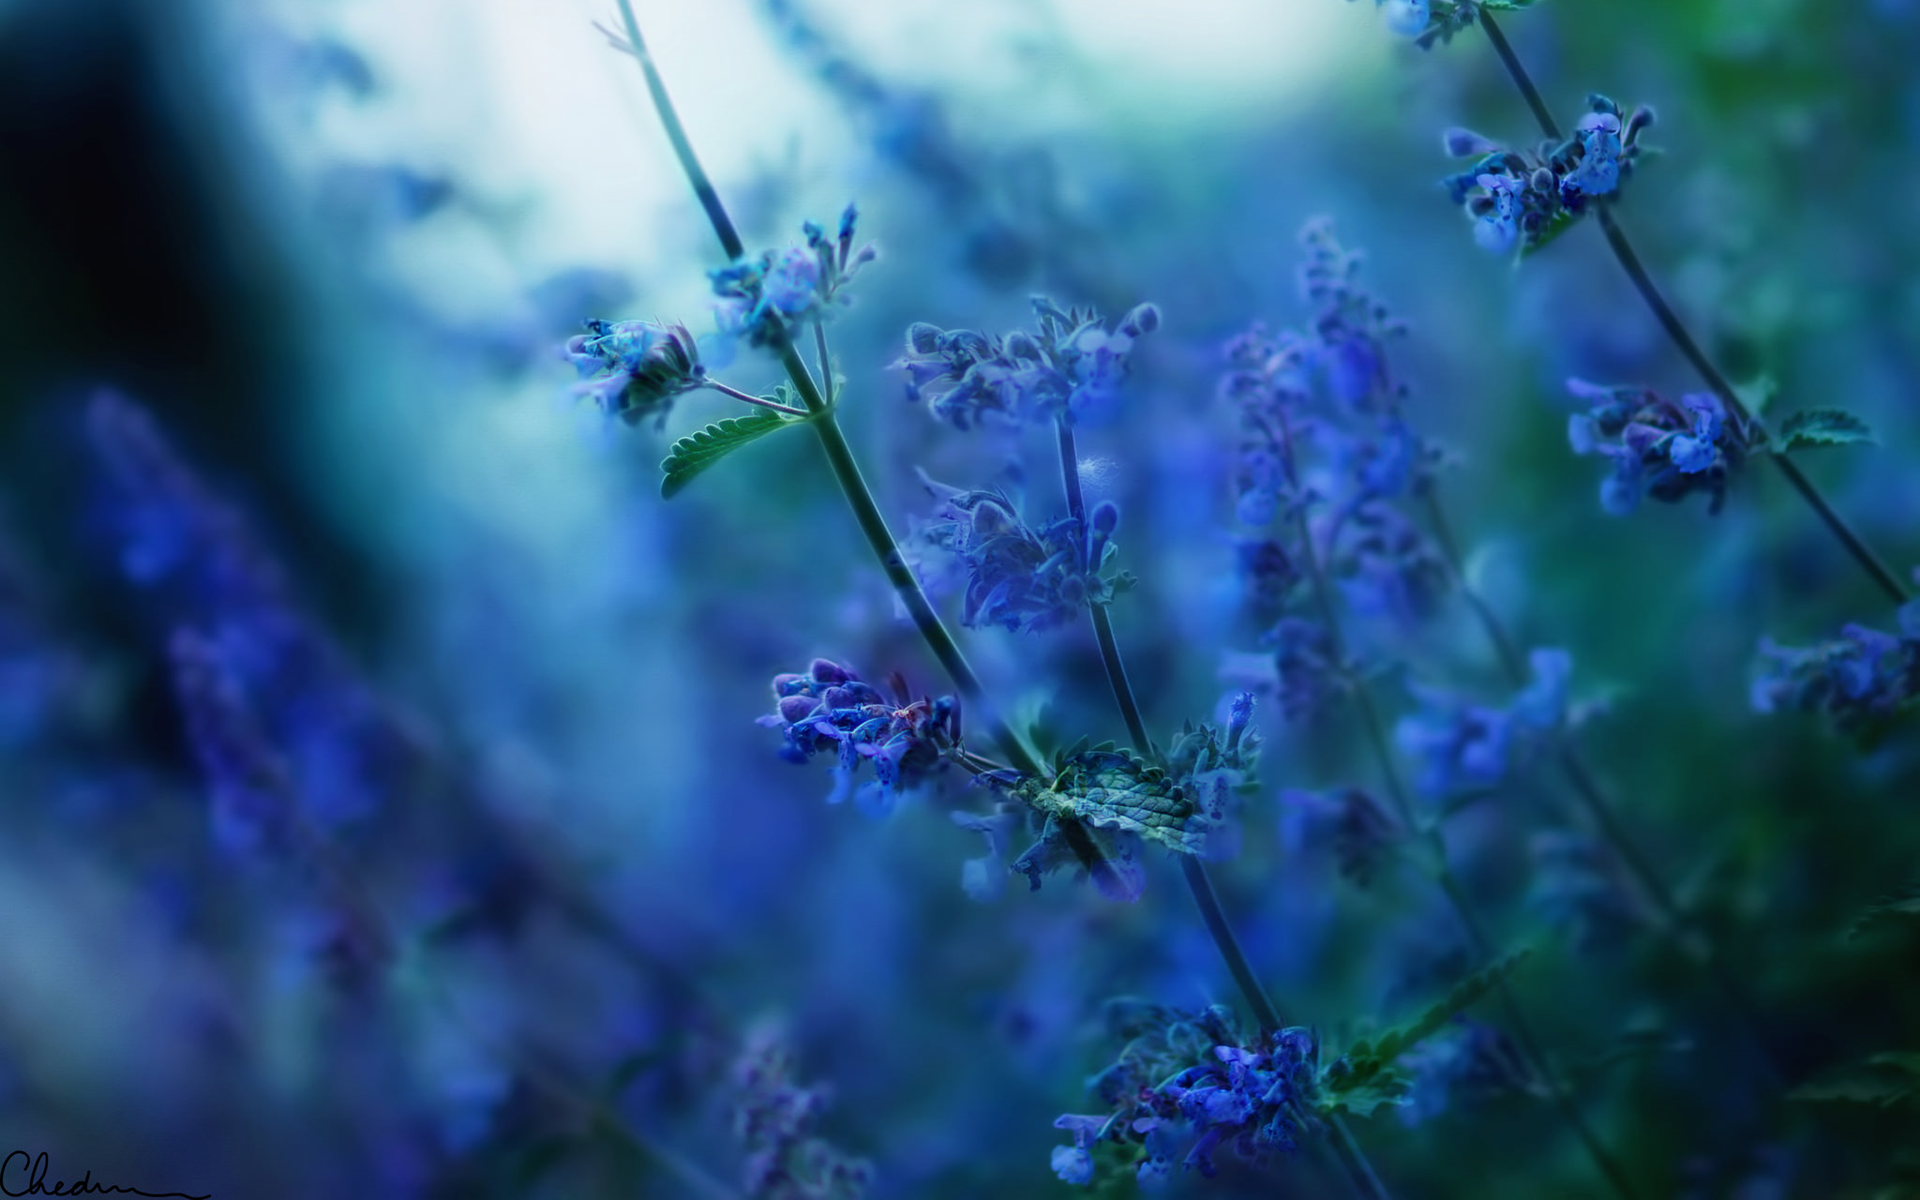 General 1920x1200 flowers nature depth of field sunlight blurred blue flowers plants outdoors